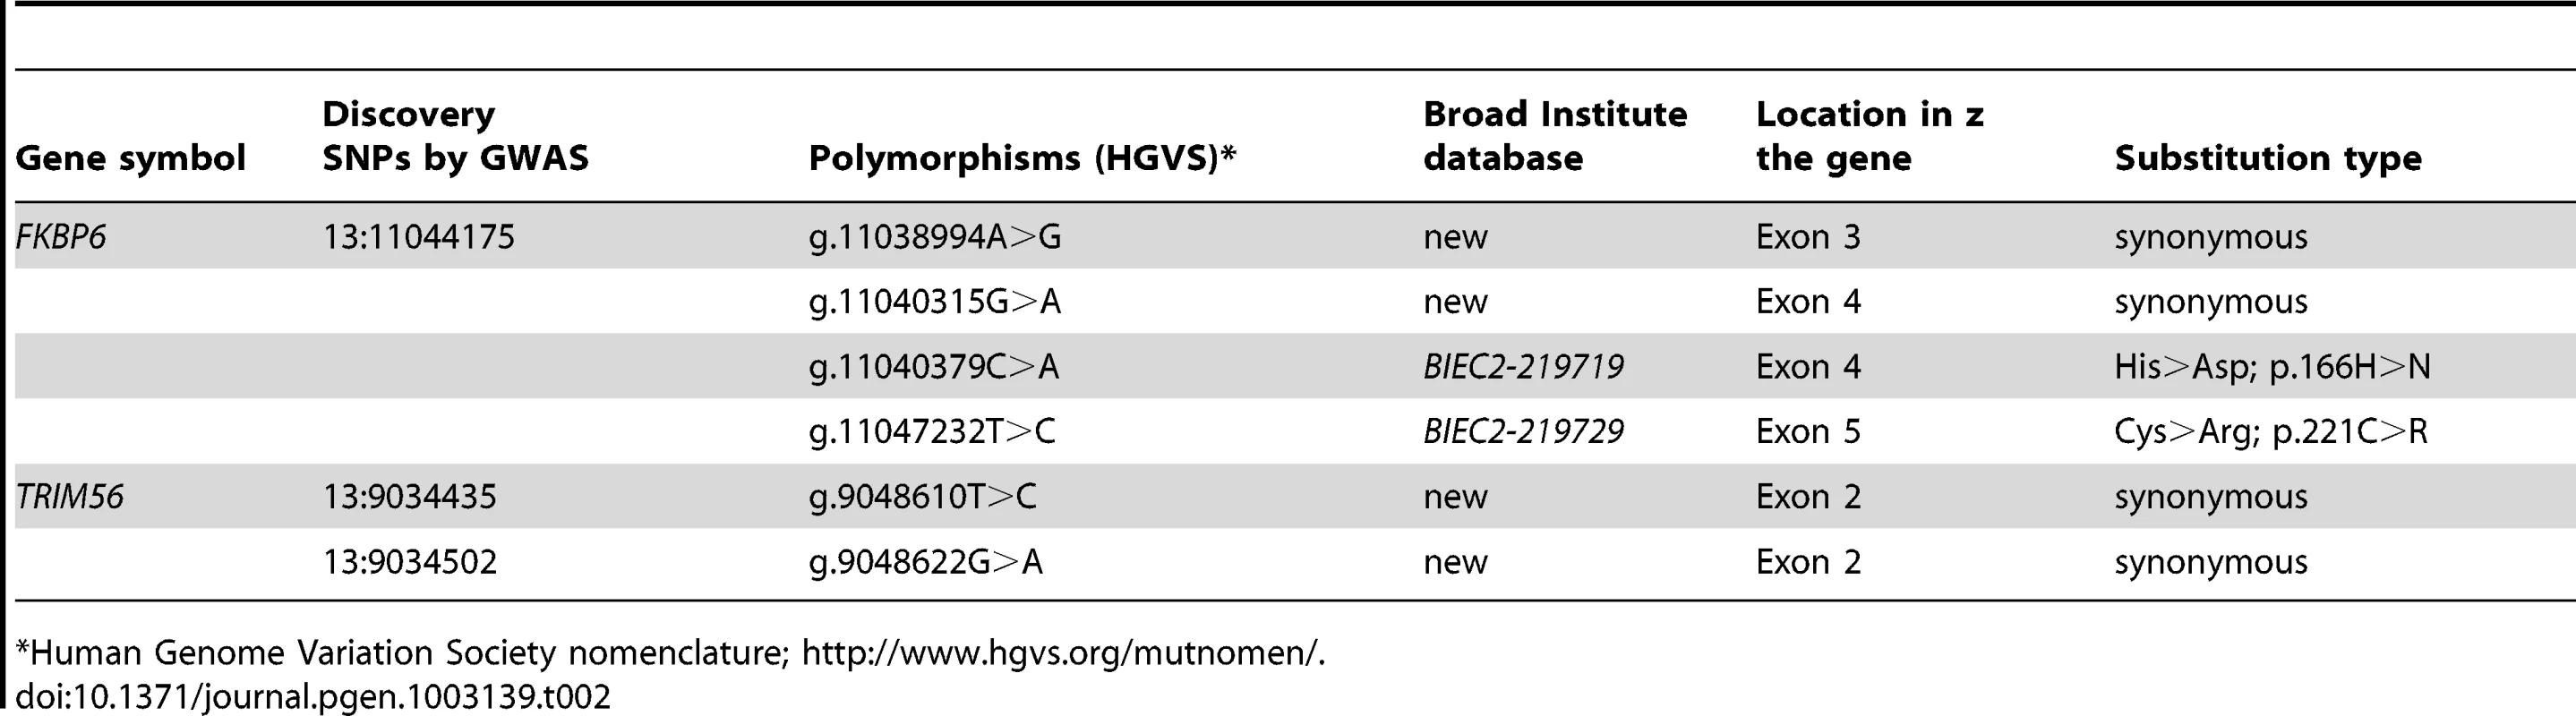 Polymorphisms identified in the sequences of <i>FKBP6</i> and <i>TRIM56</i>.